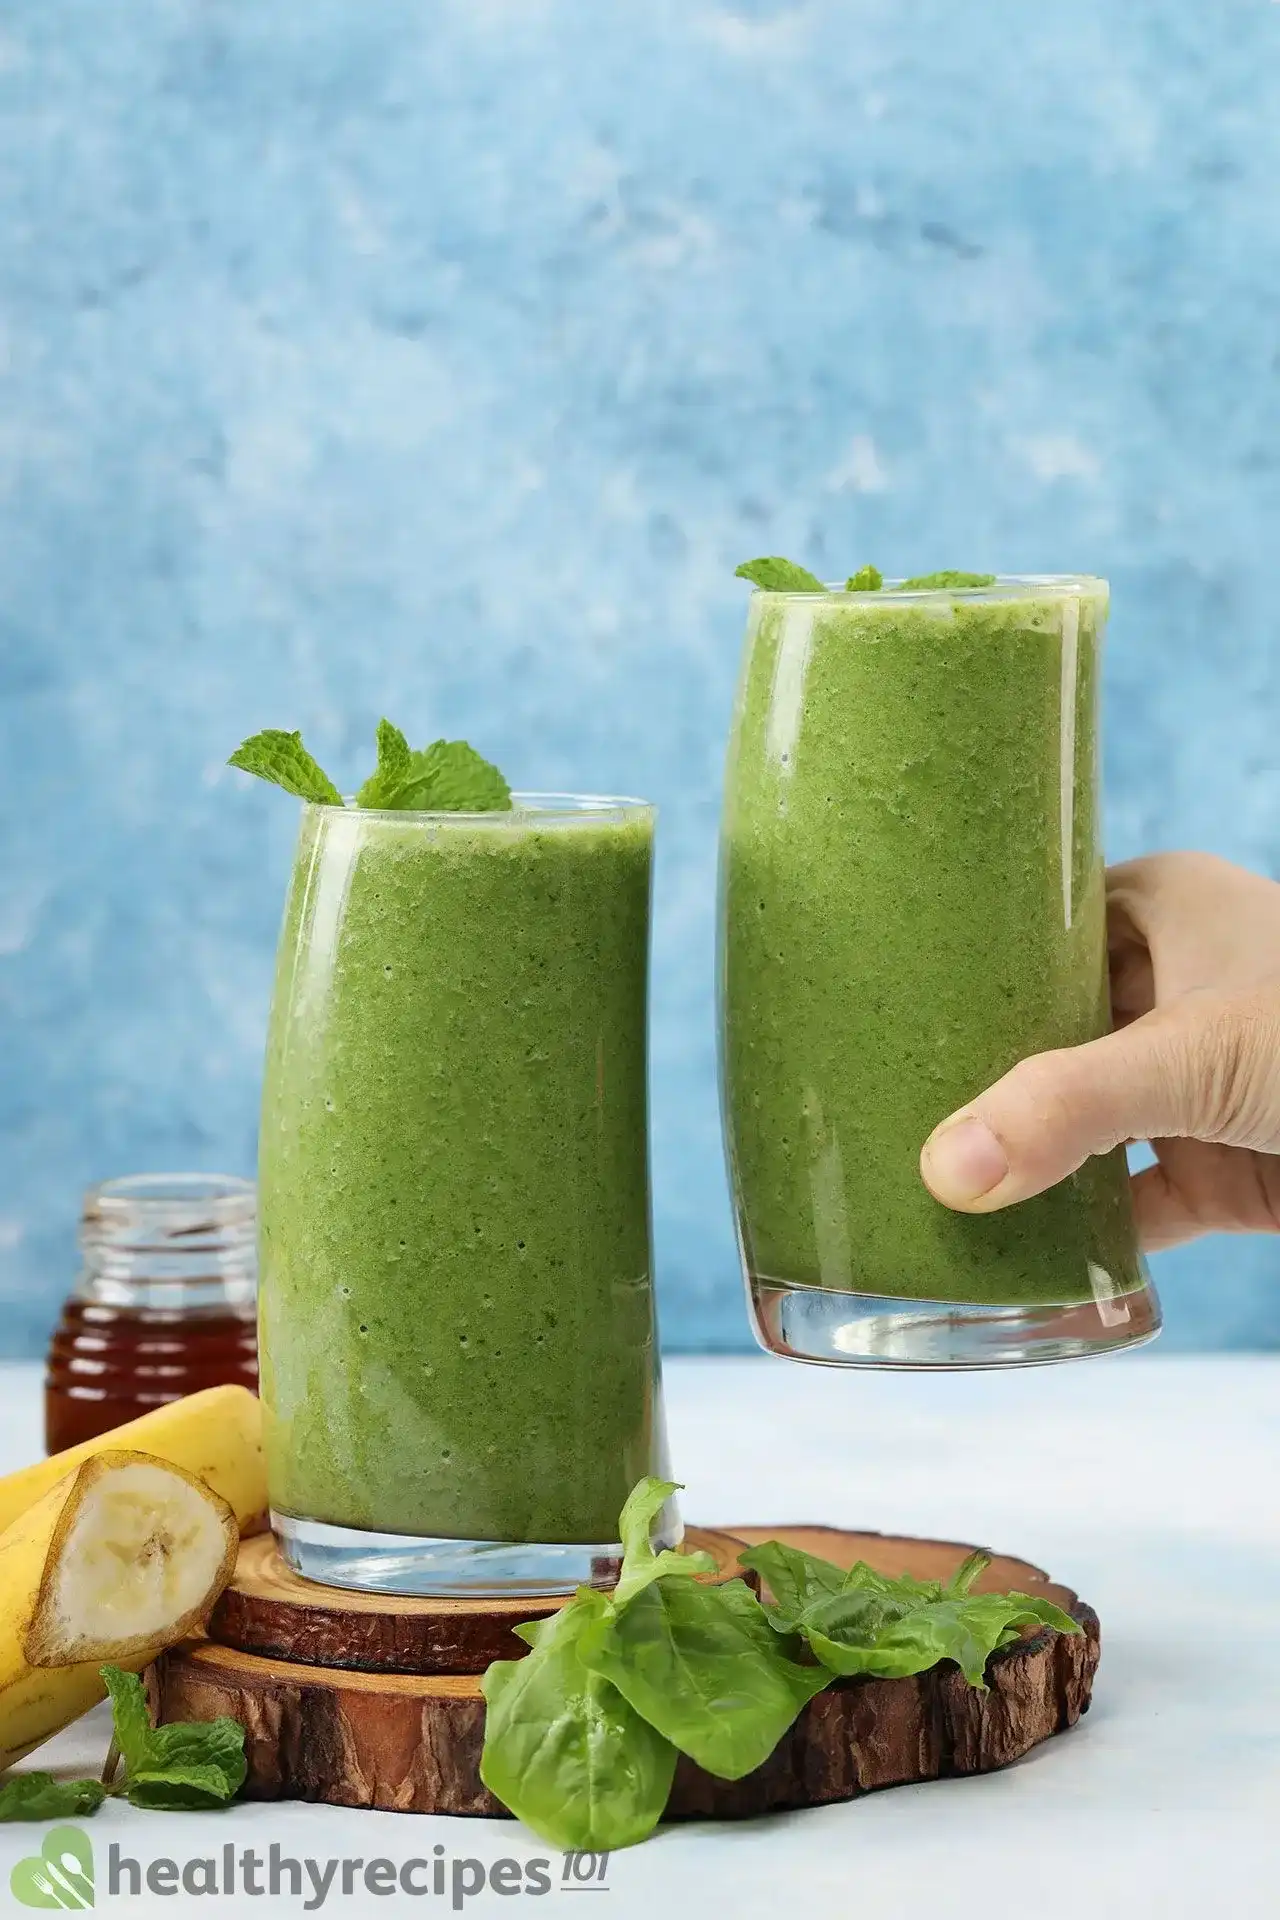 Spinach Banana Smoothie Recipe: Healthy Leafy Green Smoothie